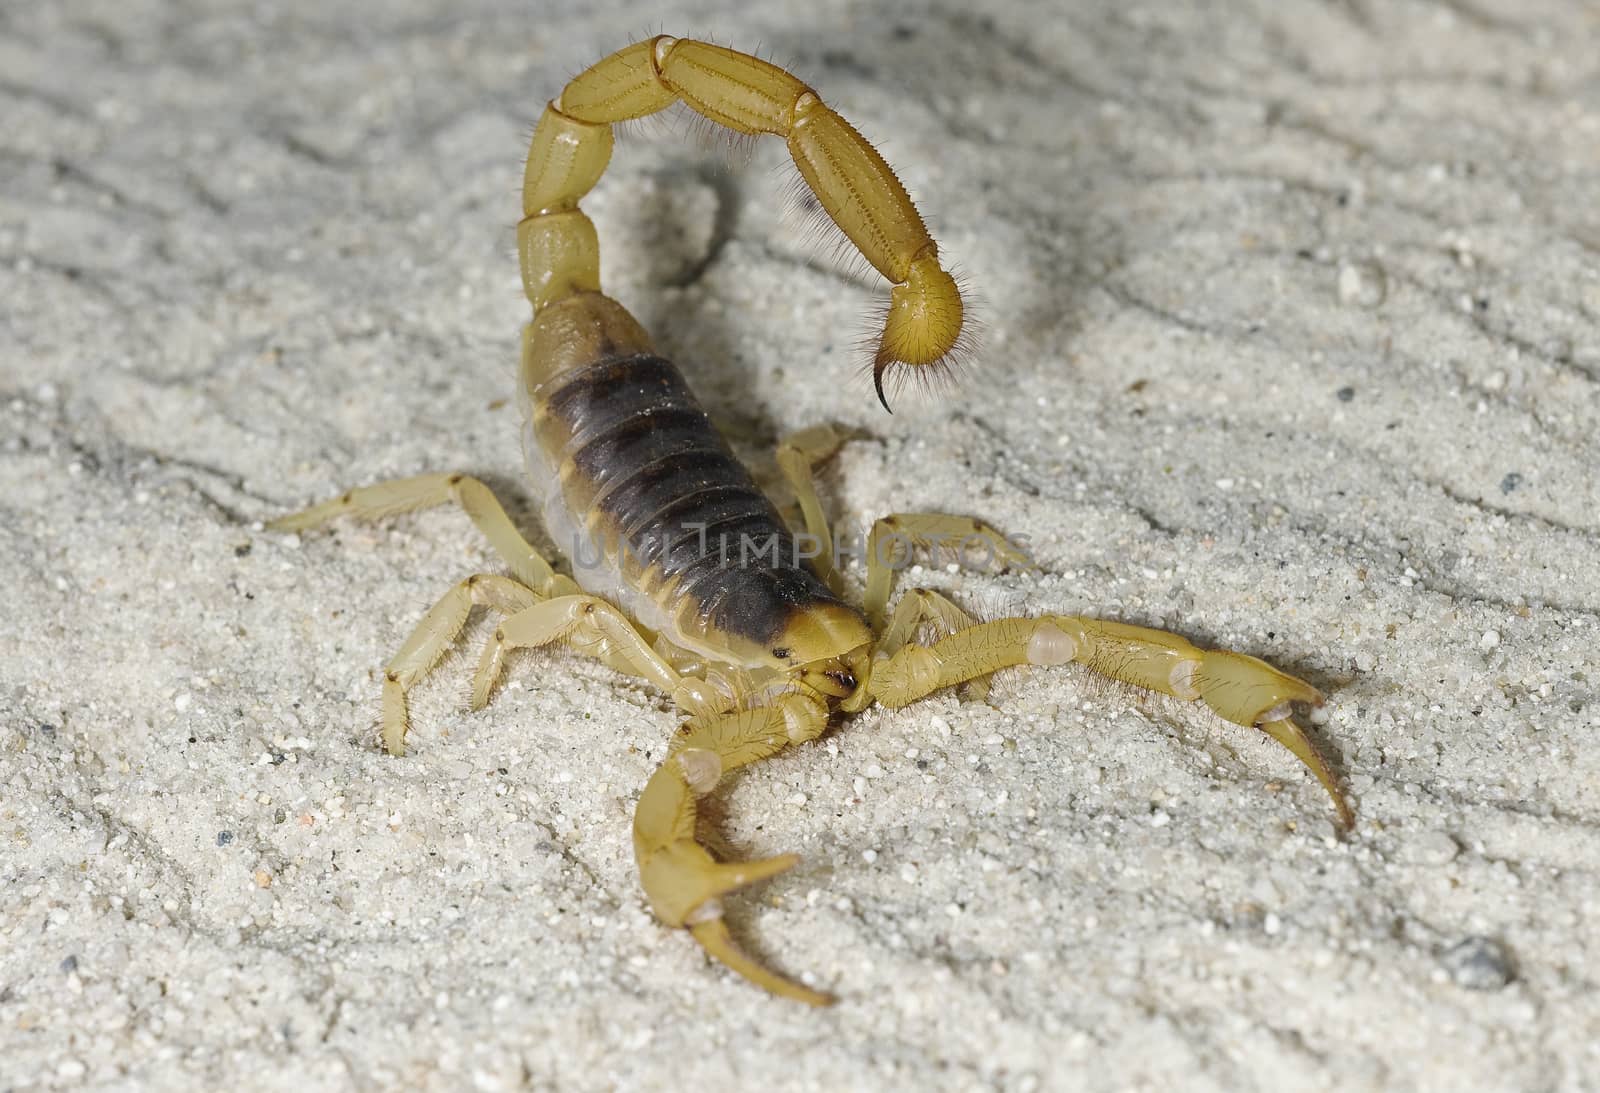 Scorpion with tail up